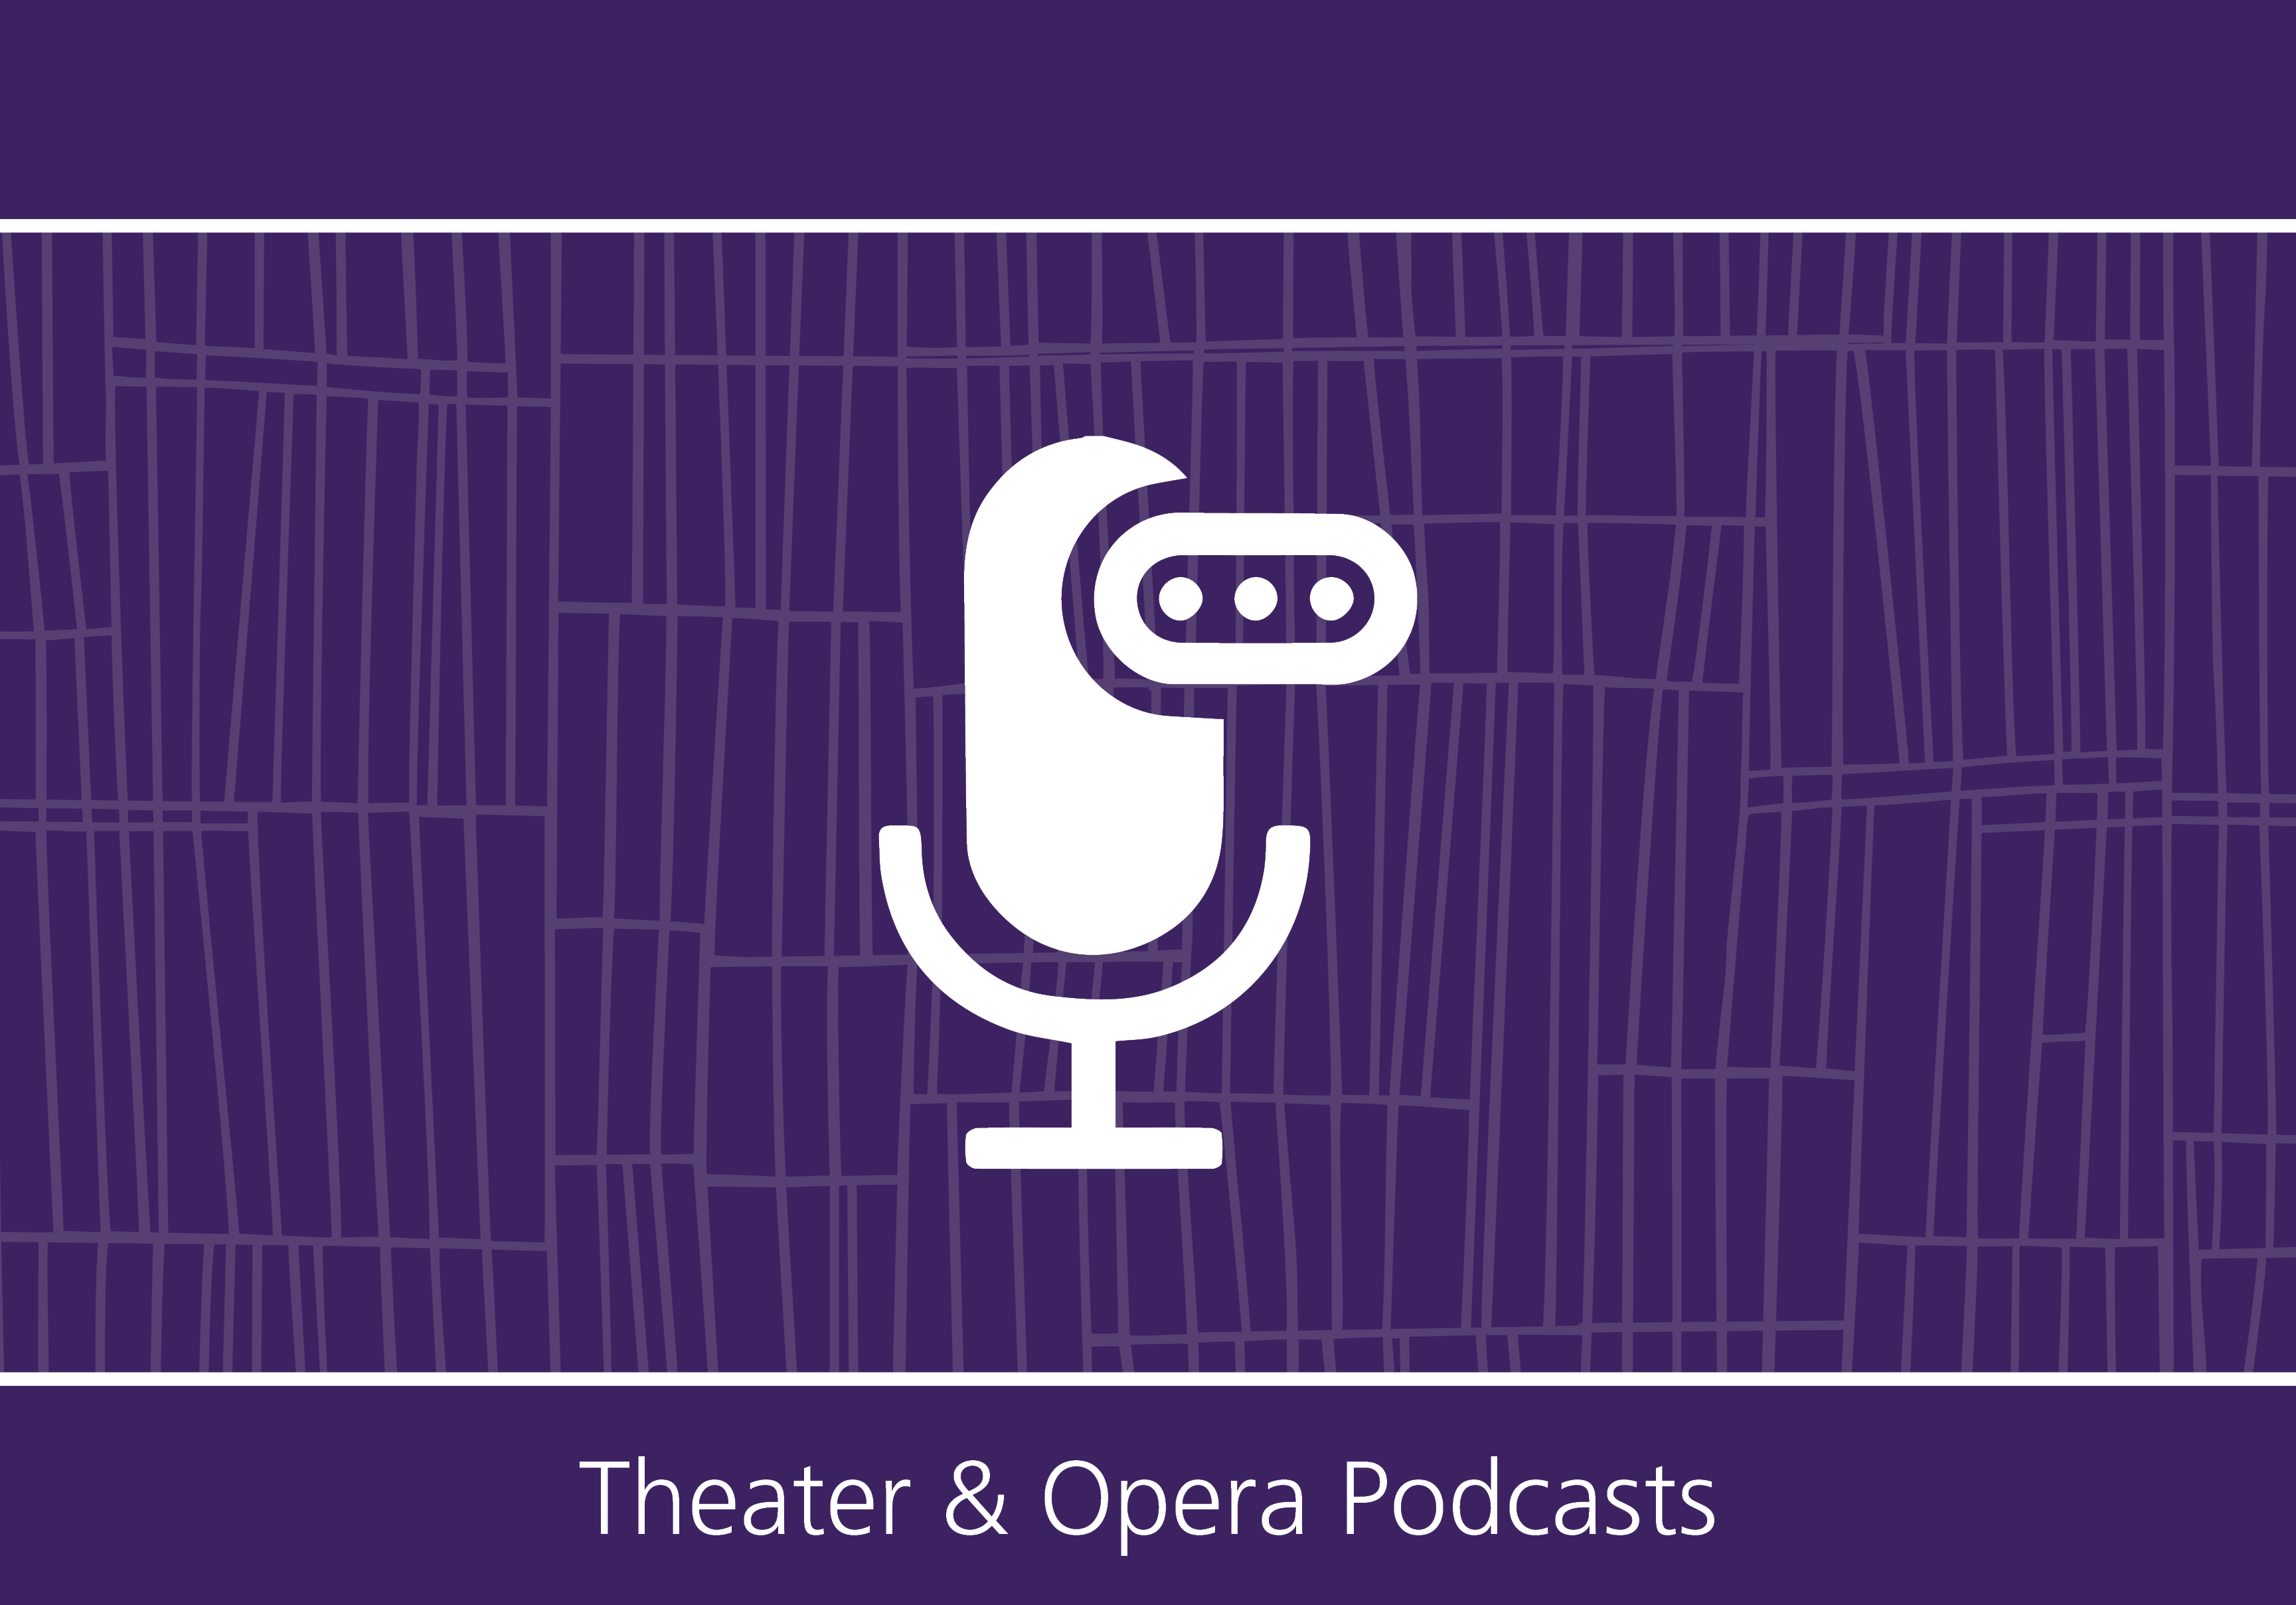 Theater Podcasts graphic